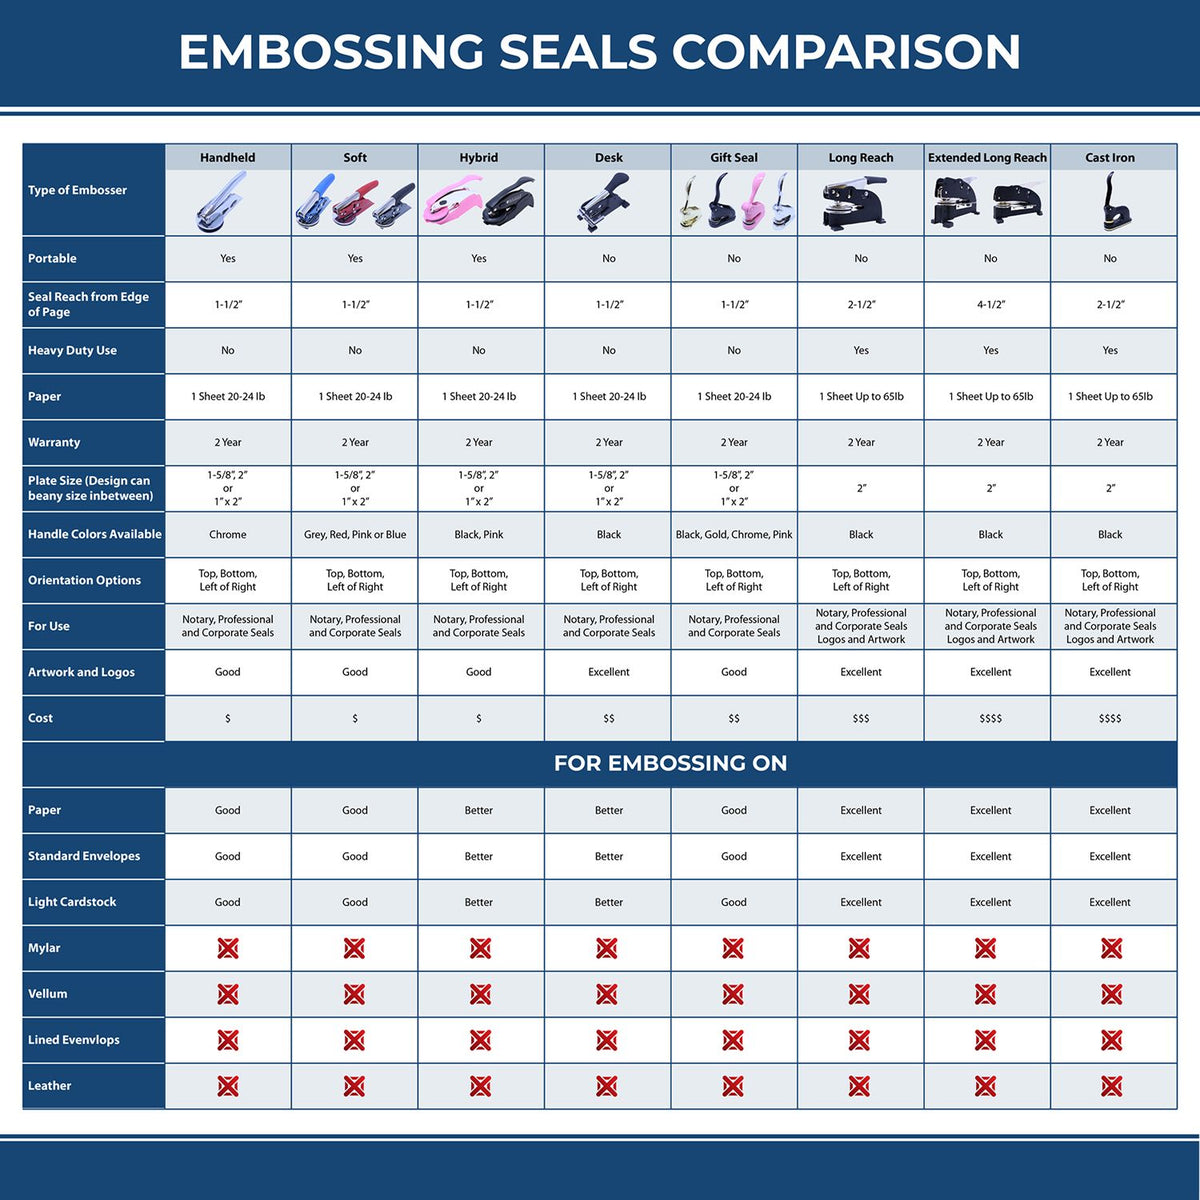 A comparison chart for the different types of mount models available for the Long Reach Mississippi PE Seal.